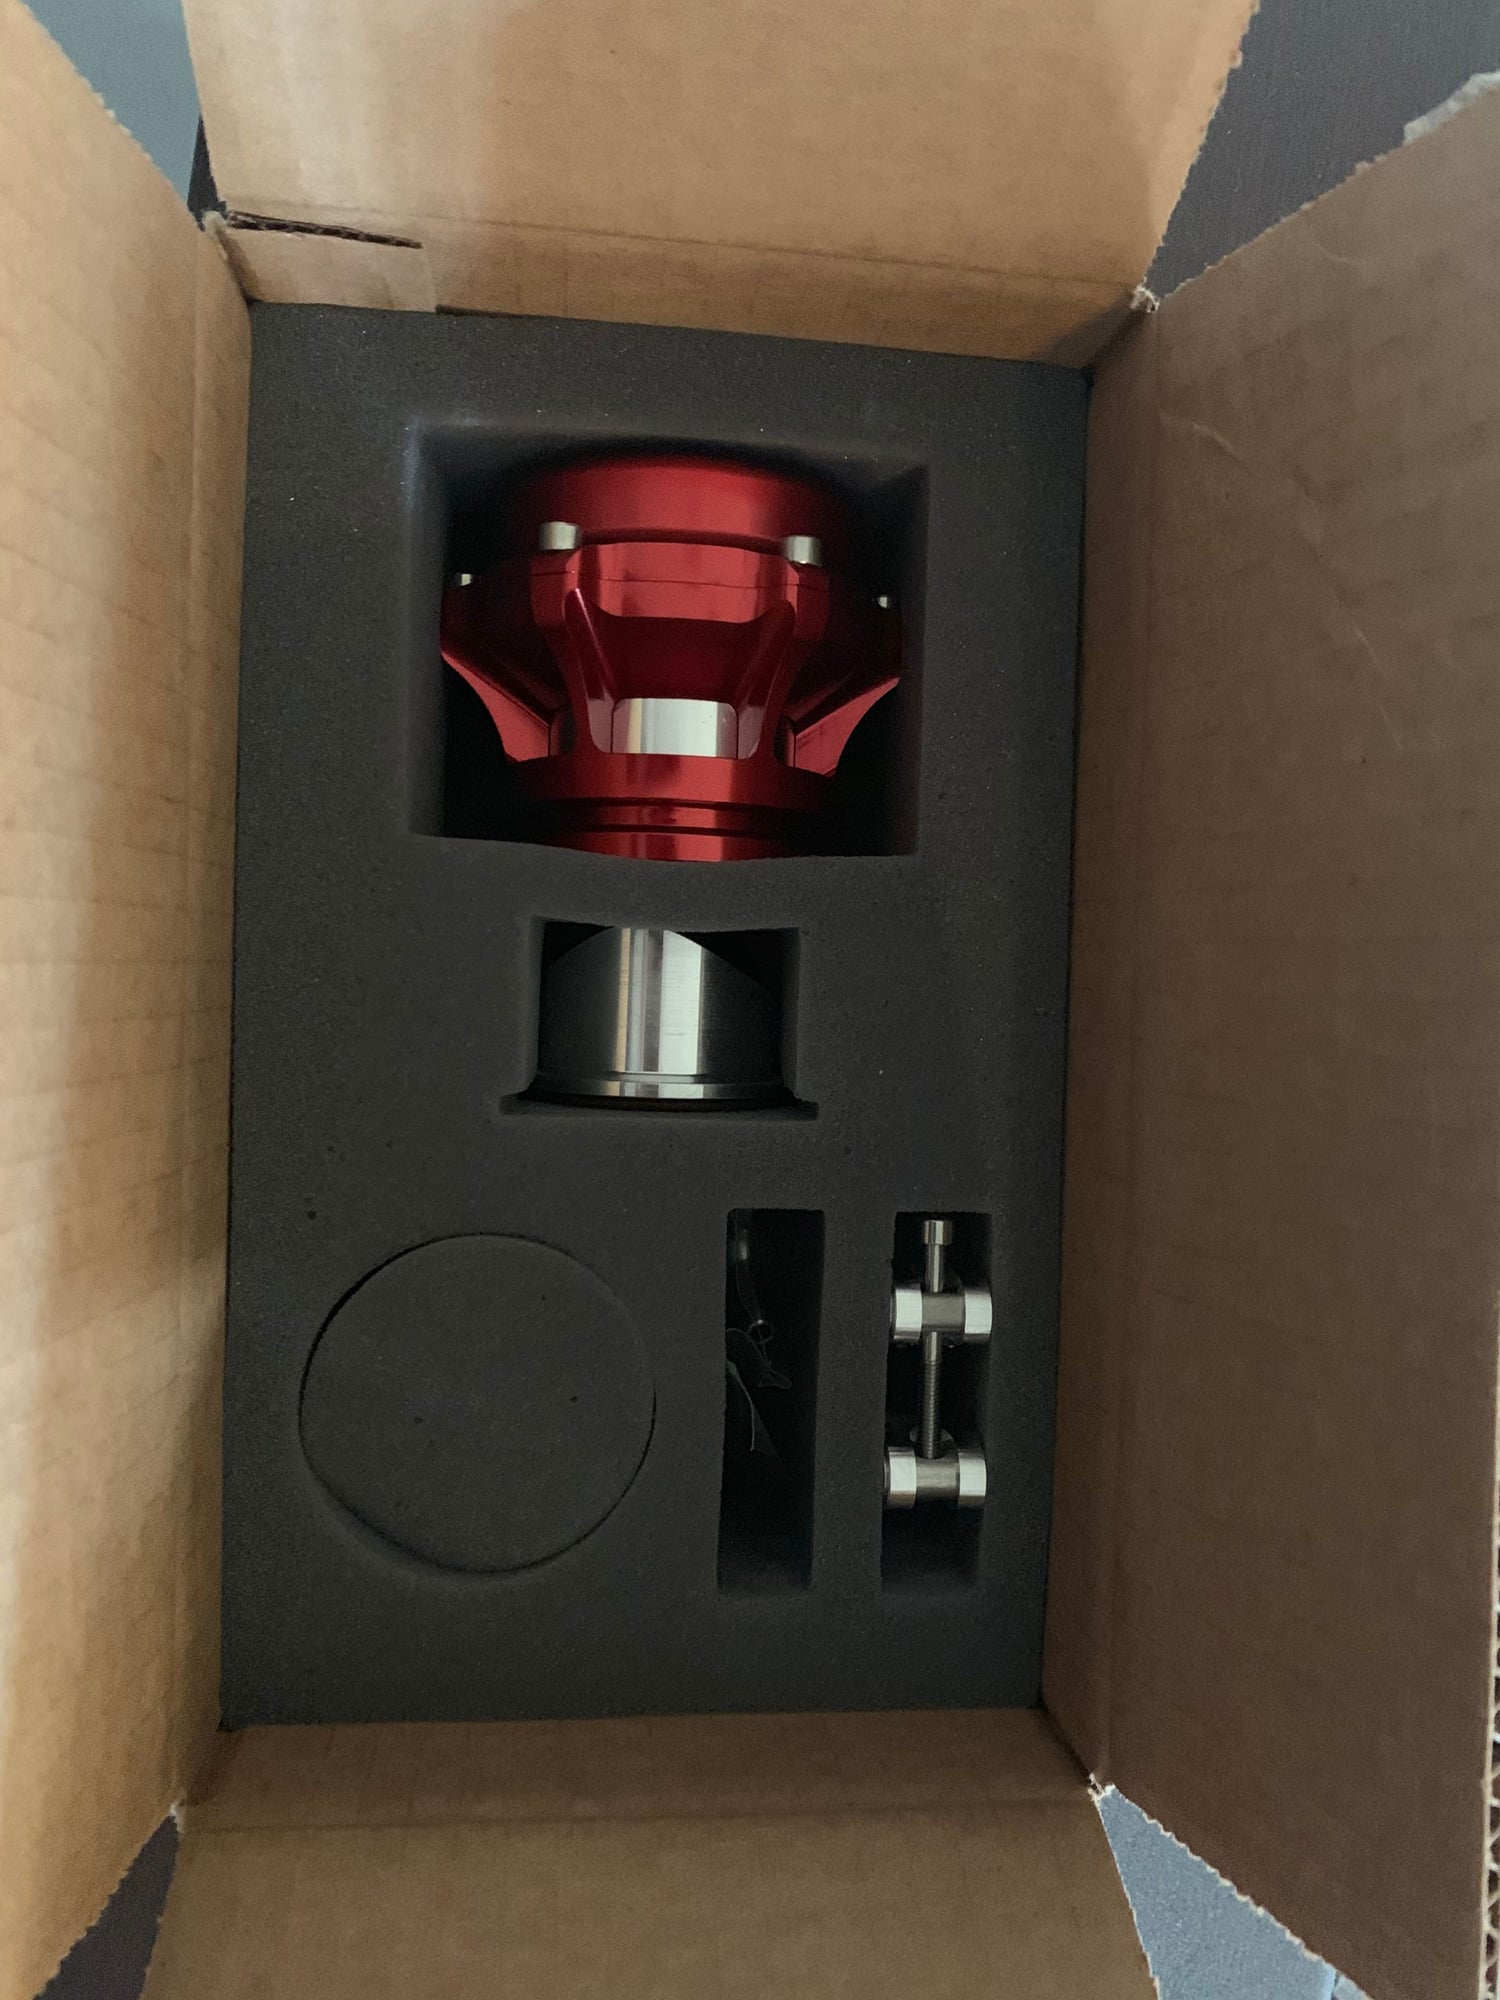 Engine - Power Adders - BNIB Red Tial BOV - New - All Years Any Make All Models - Knoxville, TN 37920, United States